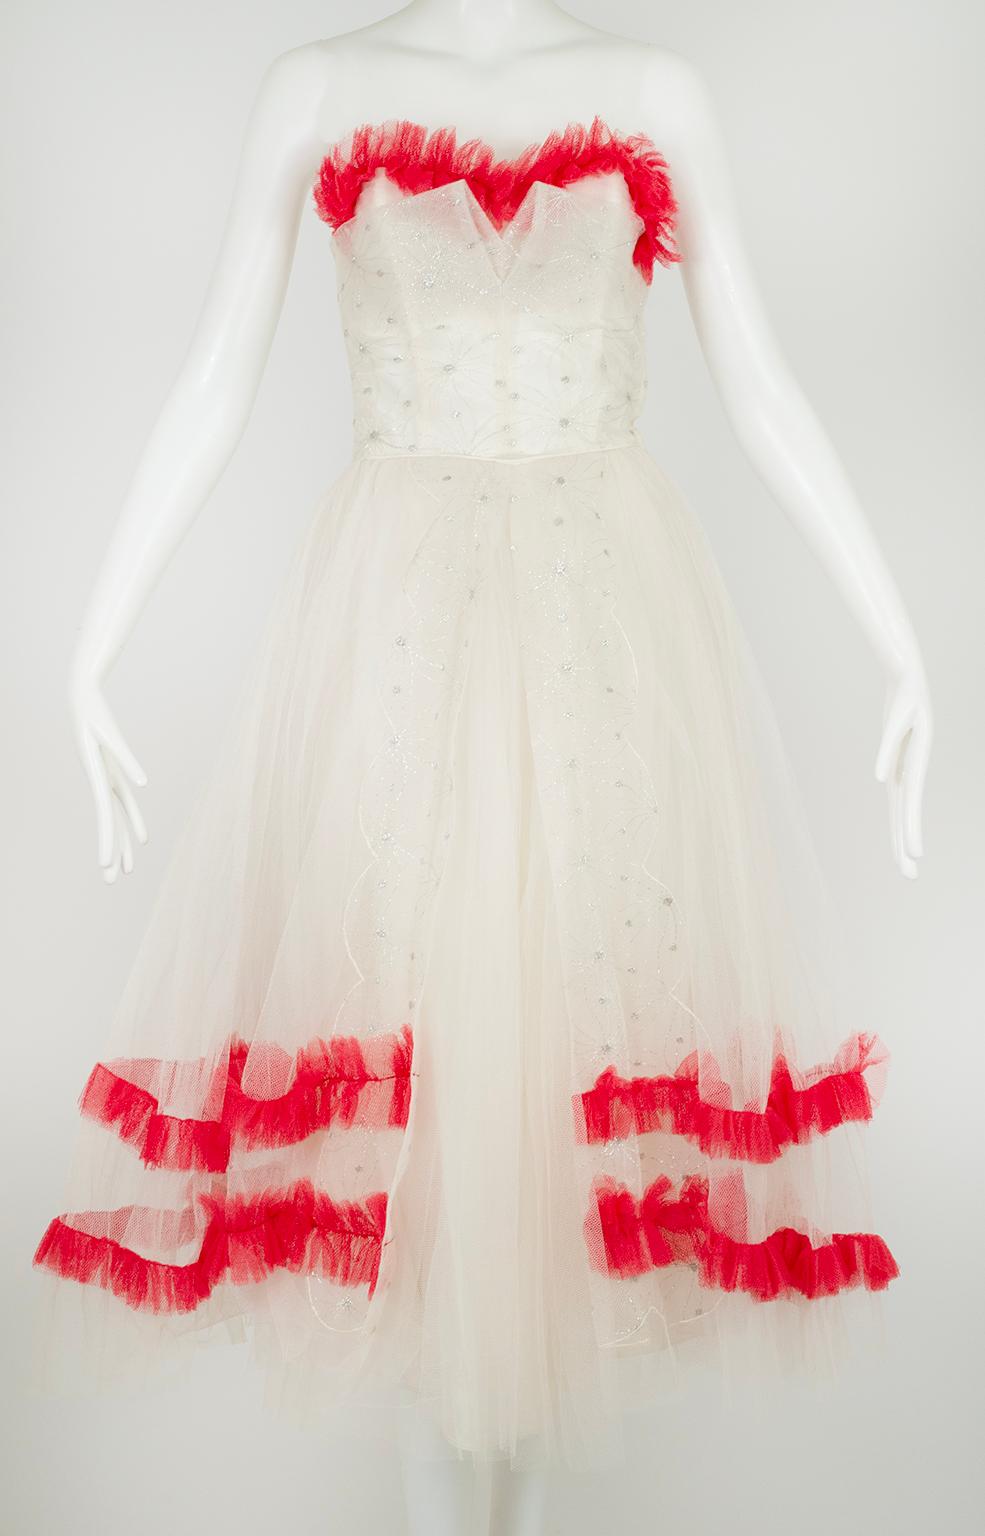 Why not throw a little Hell-bent red into your virginal white dress?  The silver filigree embroidery imparts a distinctly Nutcracker-Ballet-Snow-Fairy feeling, but the red implies pure “charm school dropout.”  A lovely exercise in contradictions